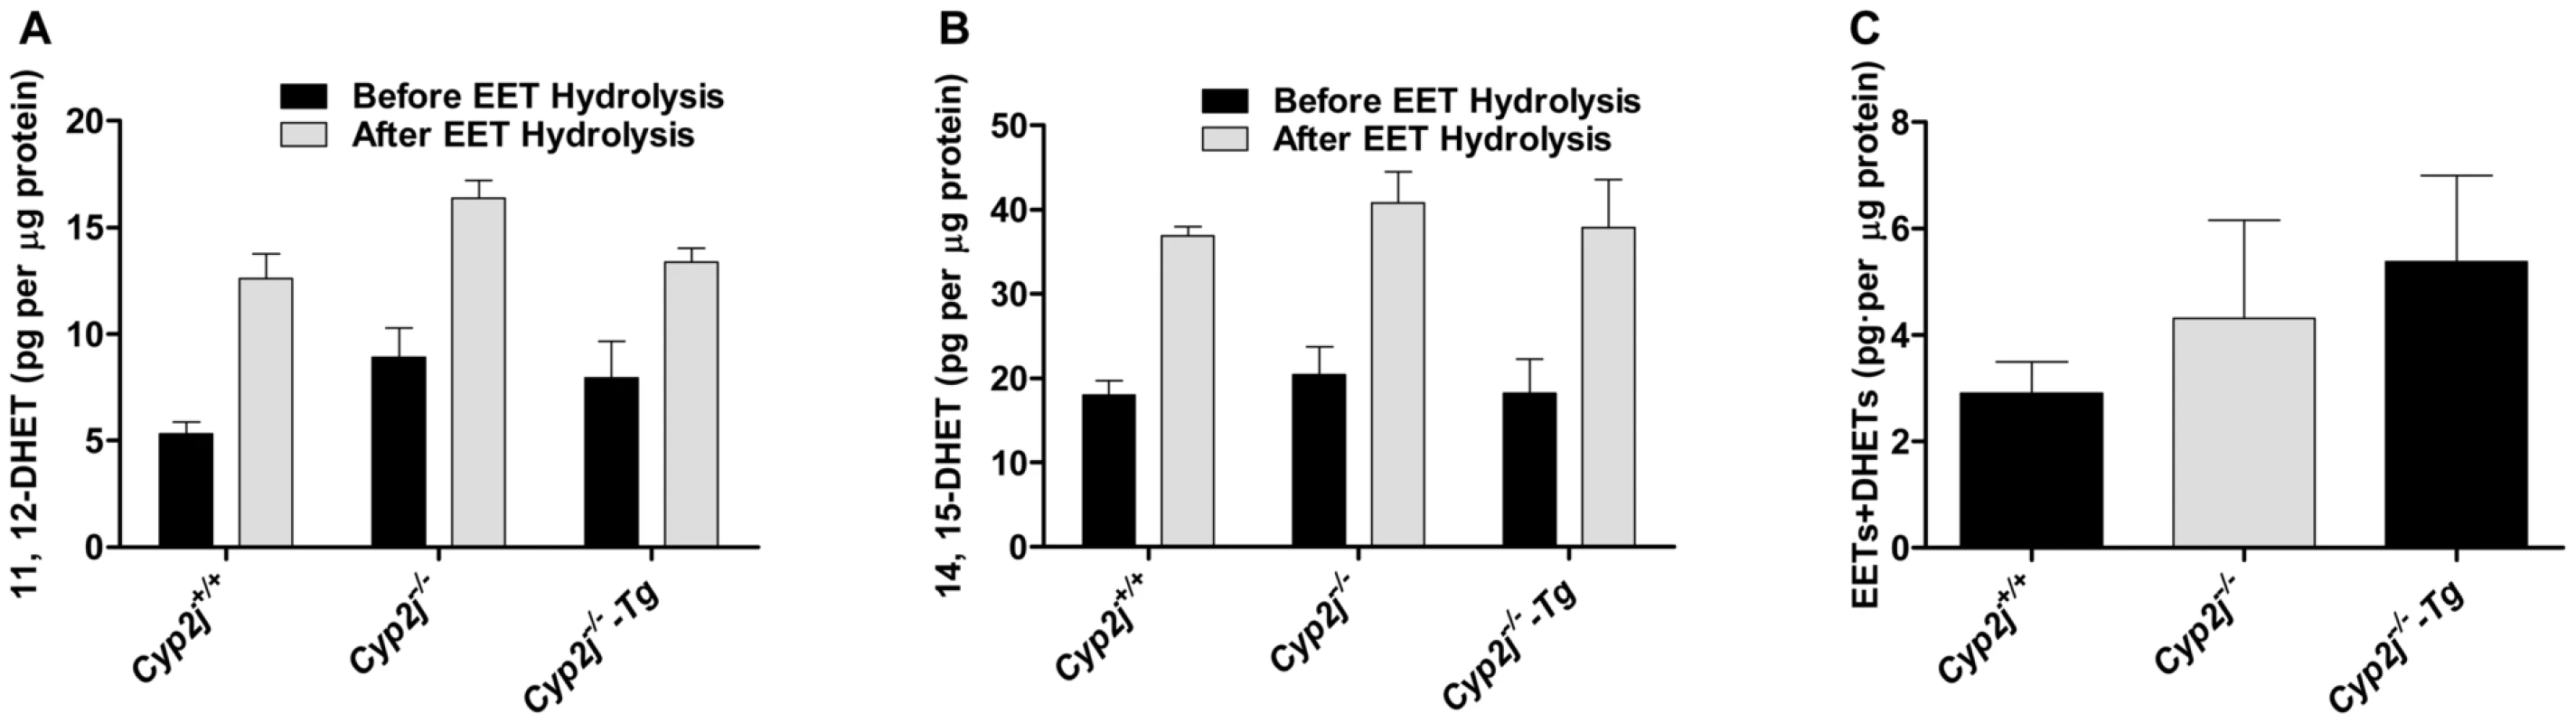 11, 12- and 14, 15-EETs measurements in BALF (A, B) and the generation of EETs and DHETs by pulmonary microsomes (C) of <i>Cyp2j<sup>+/+</sup></i>, <i>Cyp2j<sup>−/−</sup></i> and <i>Cyp2j<sup>−/−</sup>-Tg</i> mice.